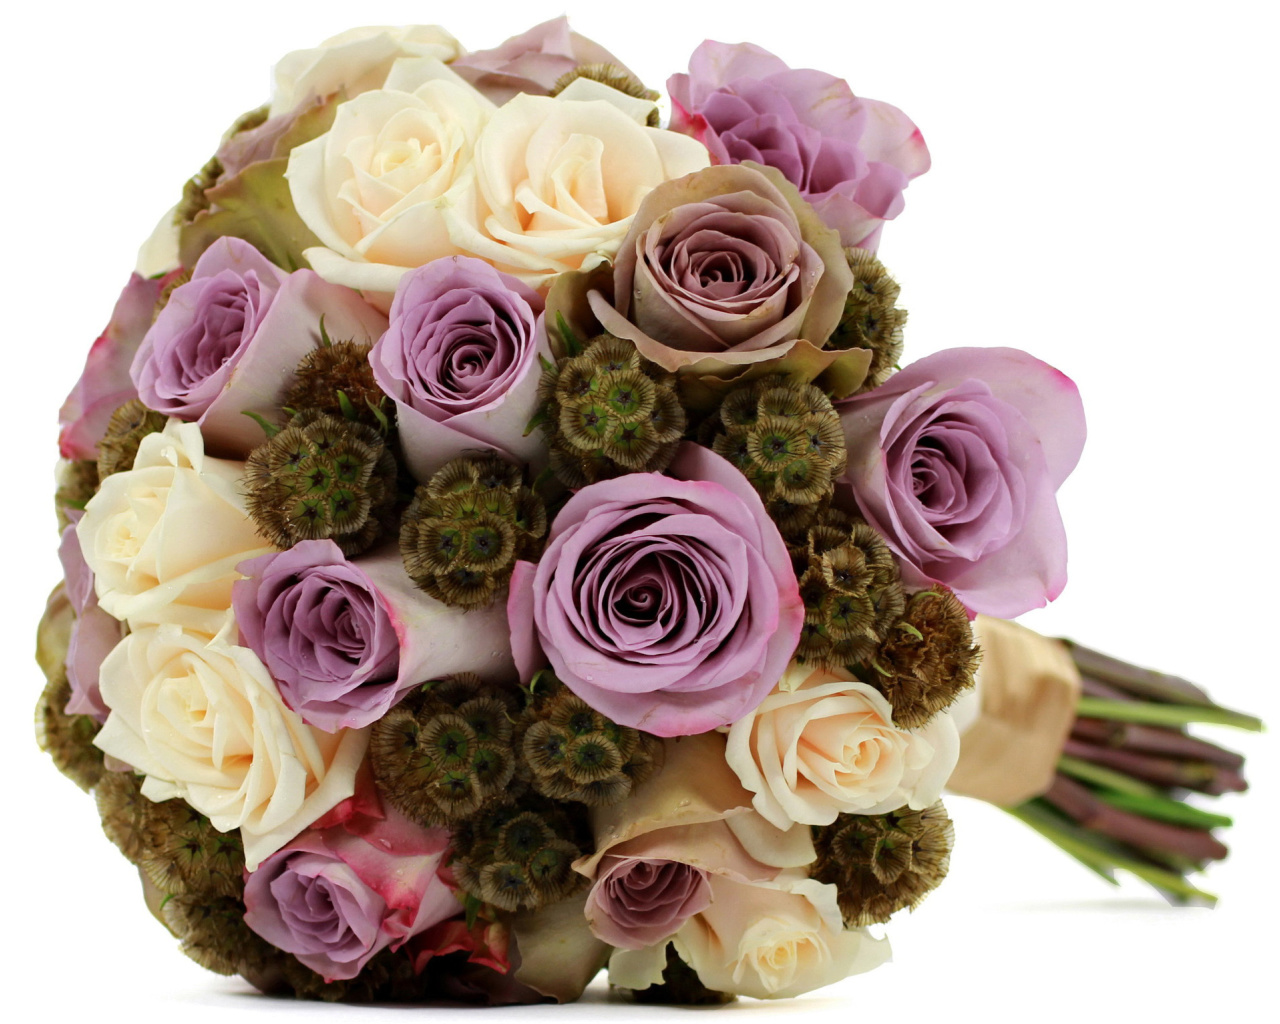 Bouquet with lilac roses screenshot #1 1280x1024